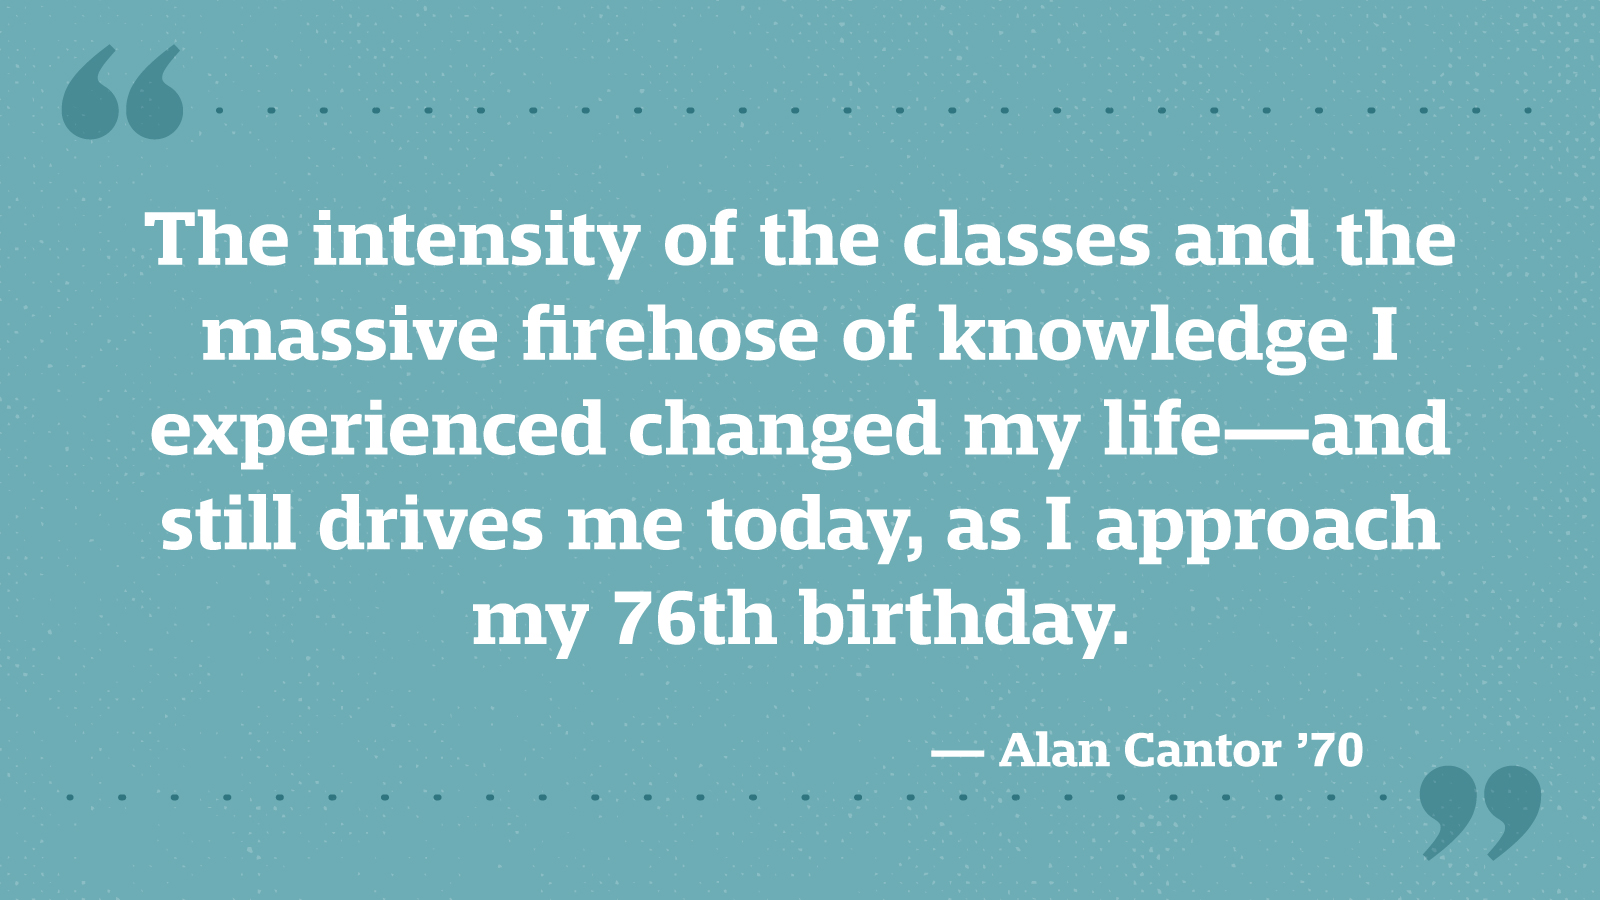 The intensity of the classes and the massive firehose of knowledge I experienced changed my life—and still drives me today, as I approach my 76th birthday. — Alan Cantor ’70